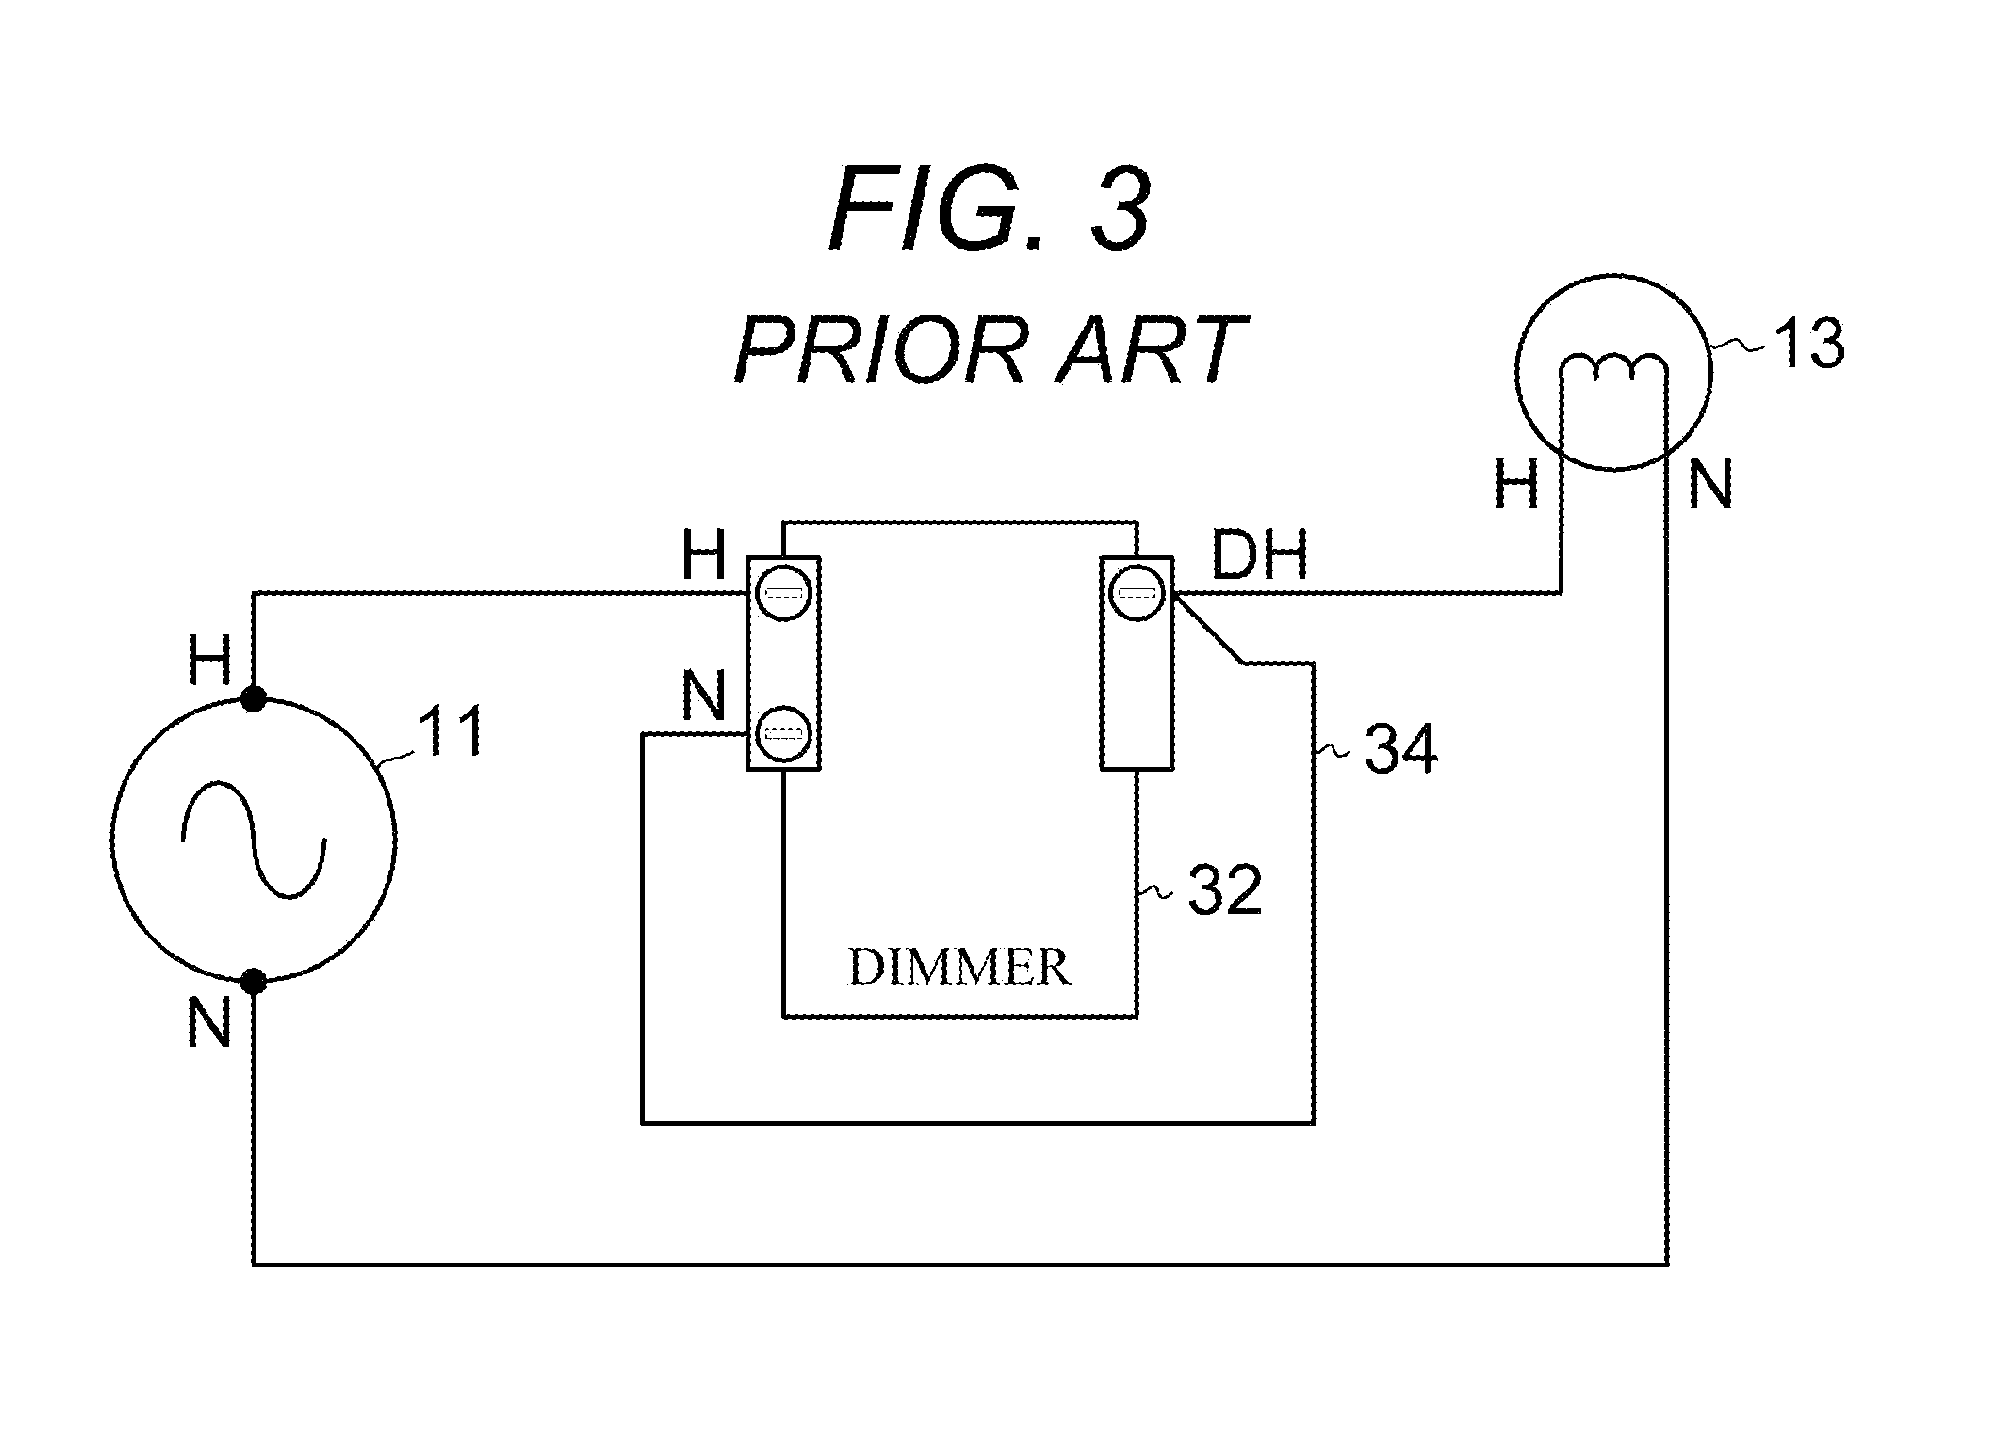 Dimmer Adaptable to Either Two or Three Active Wires